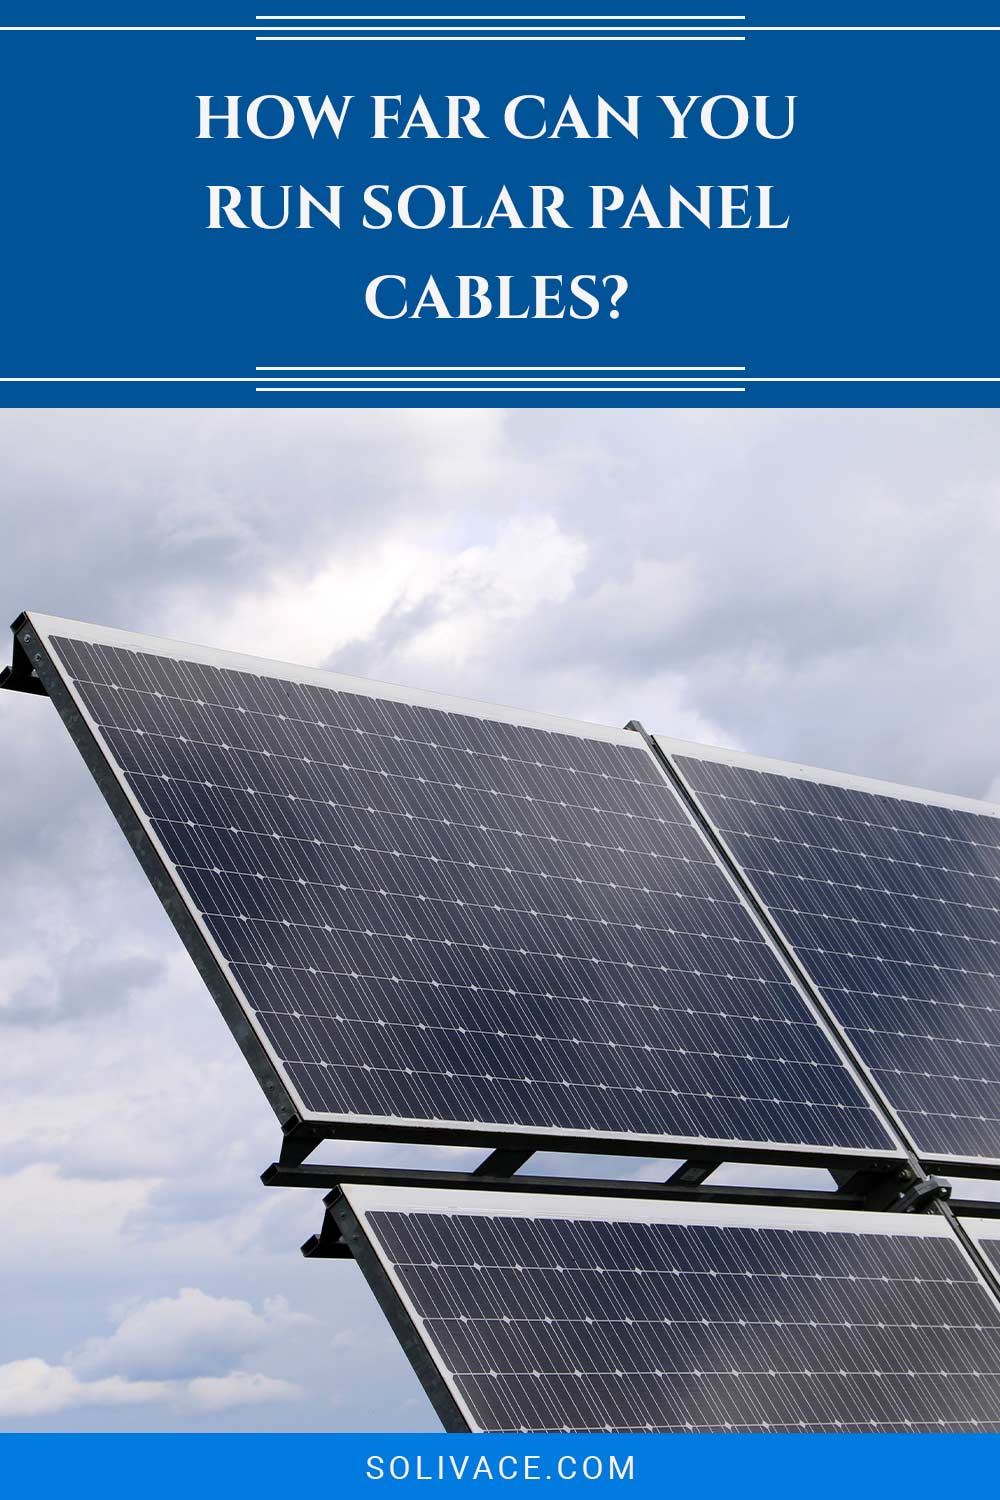 How Far Can You Run Solar Panel Cables?